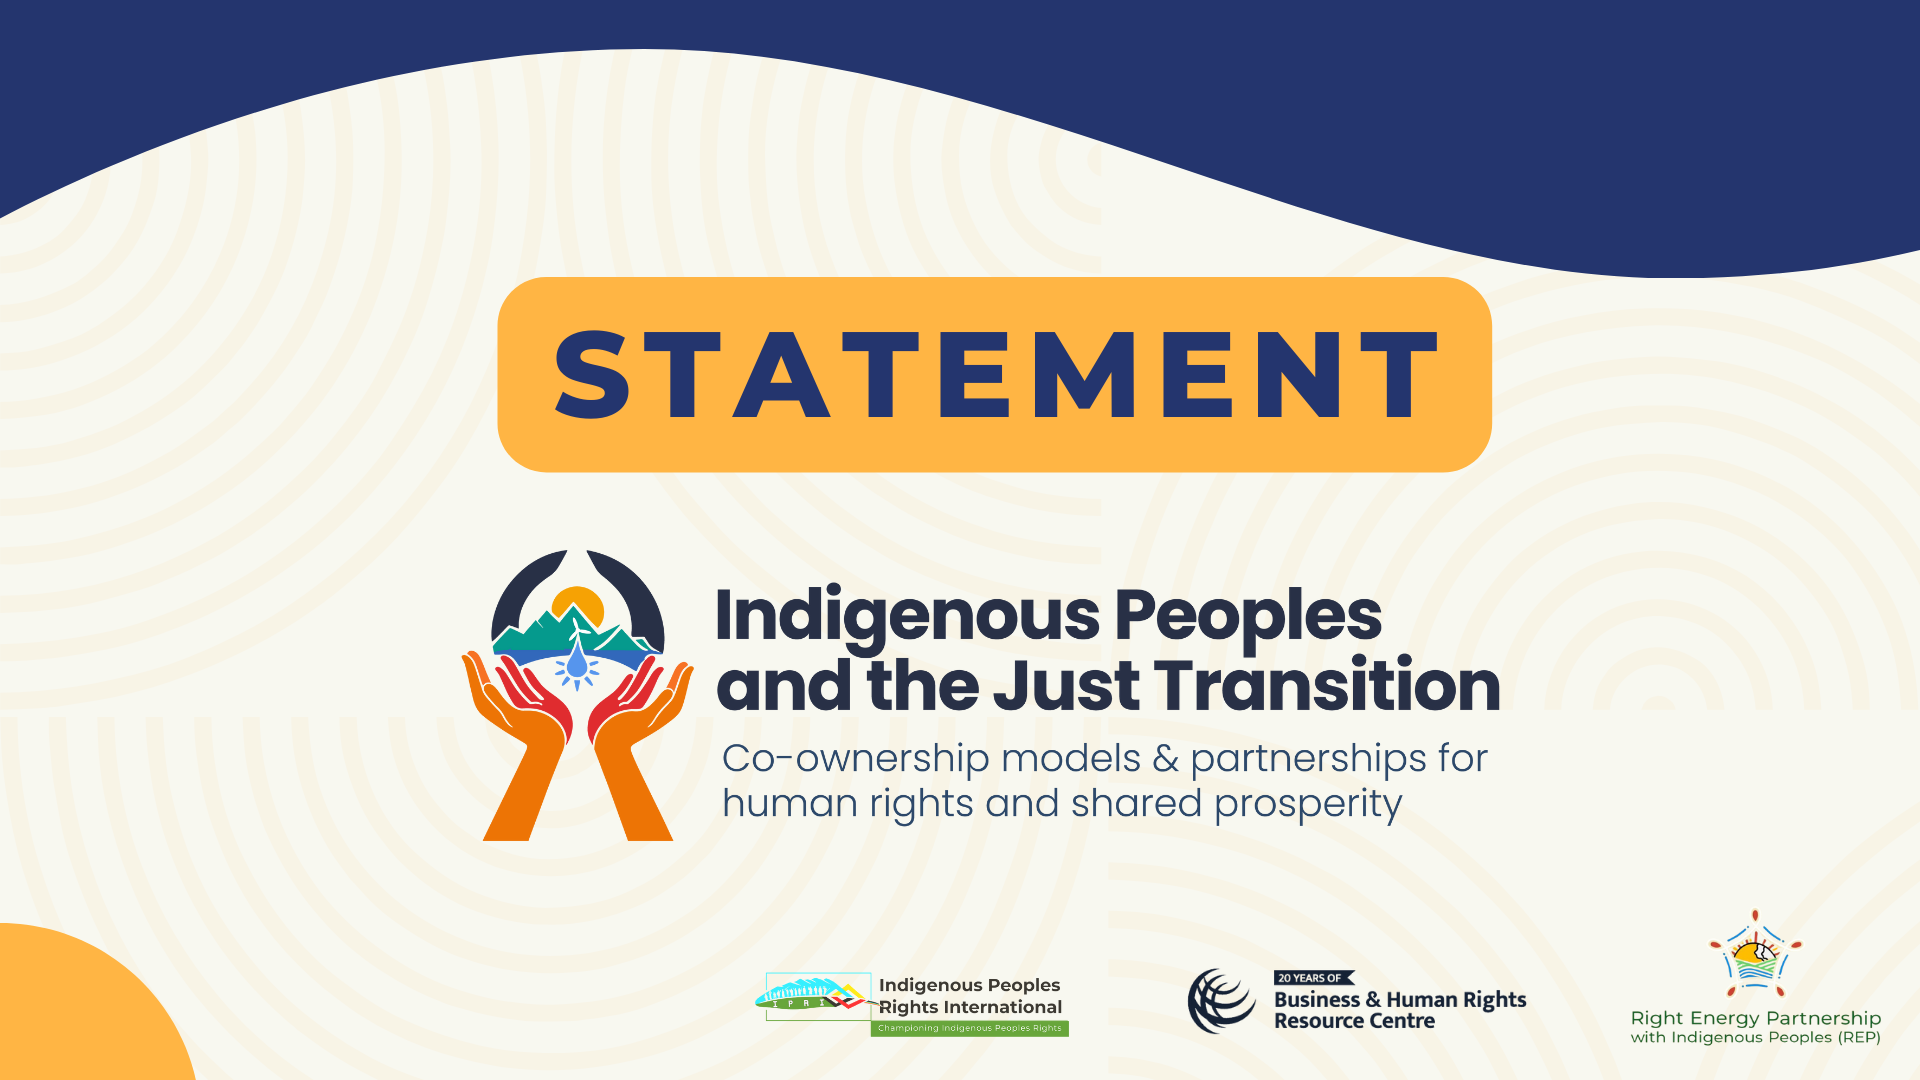 Media Advisory: Indigenous Peoples unite in call for full respect for their rights, participation & shared prosperity for just clean energy transition